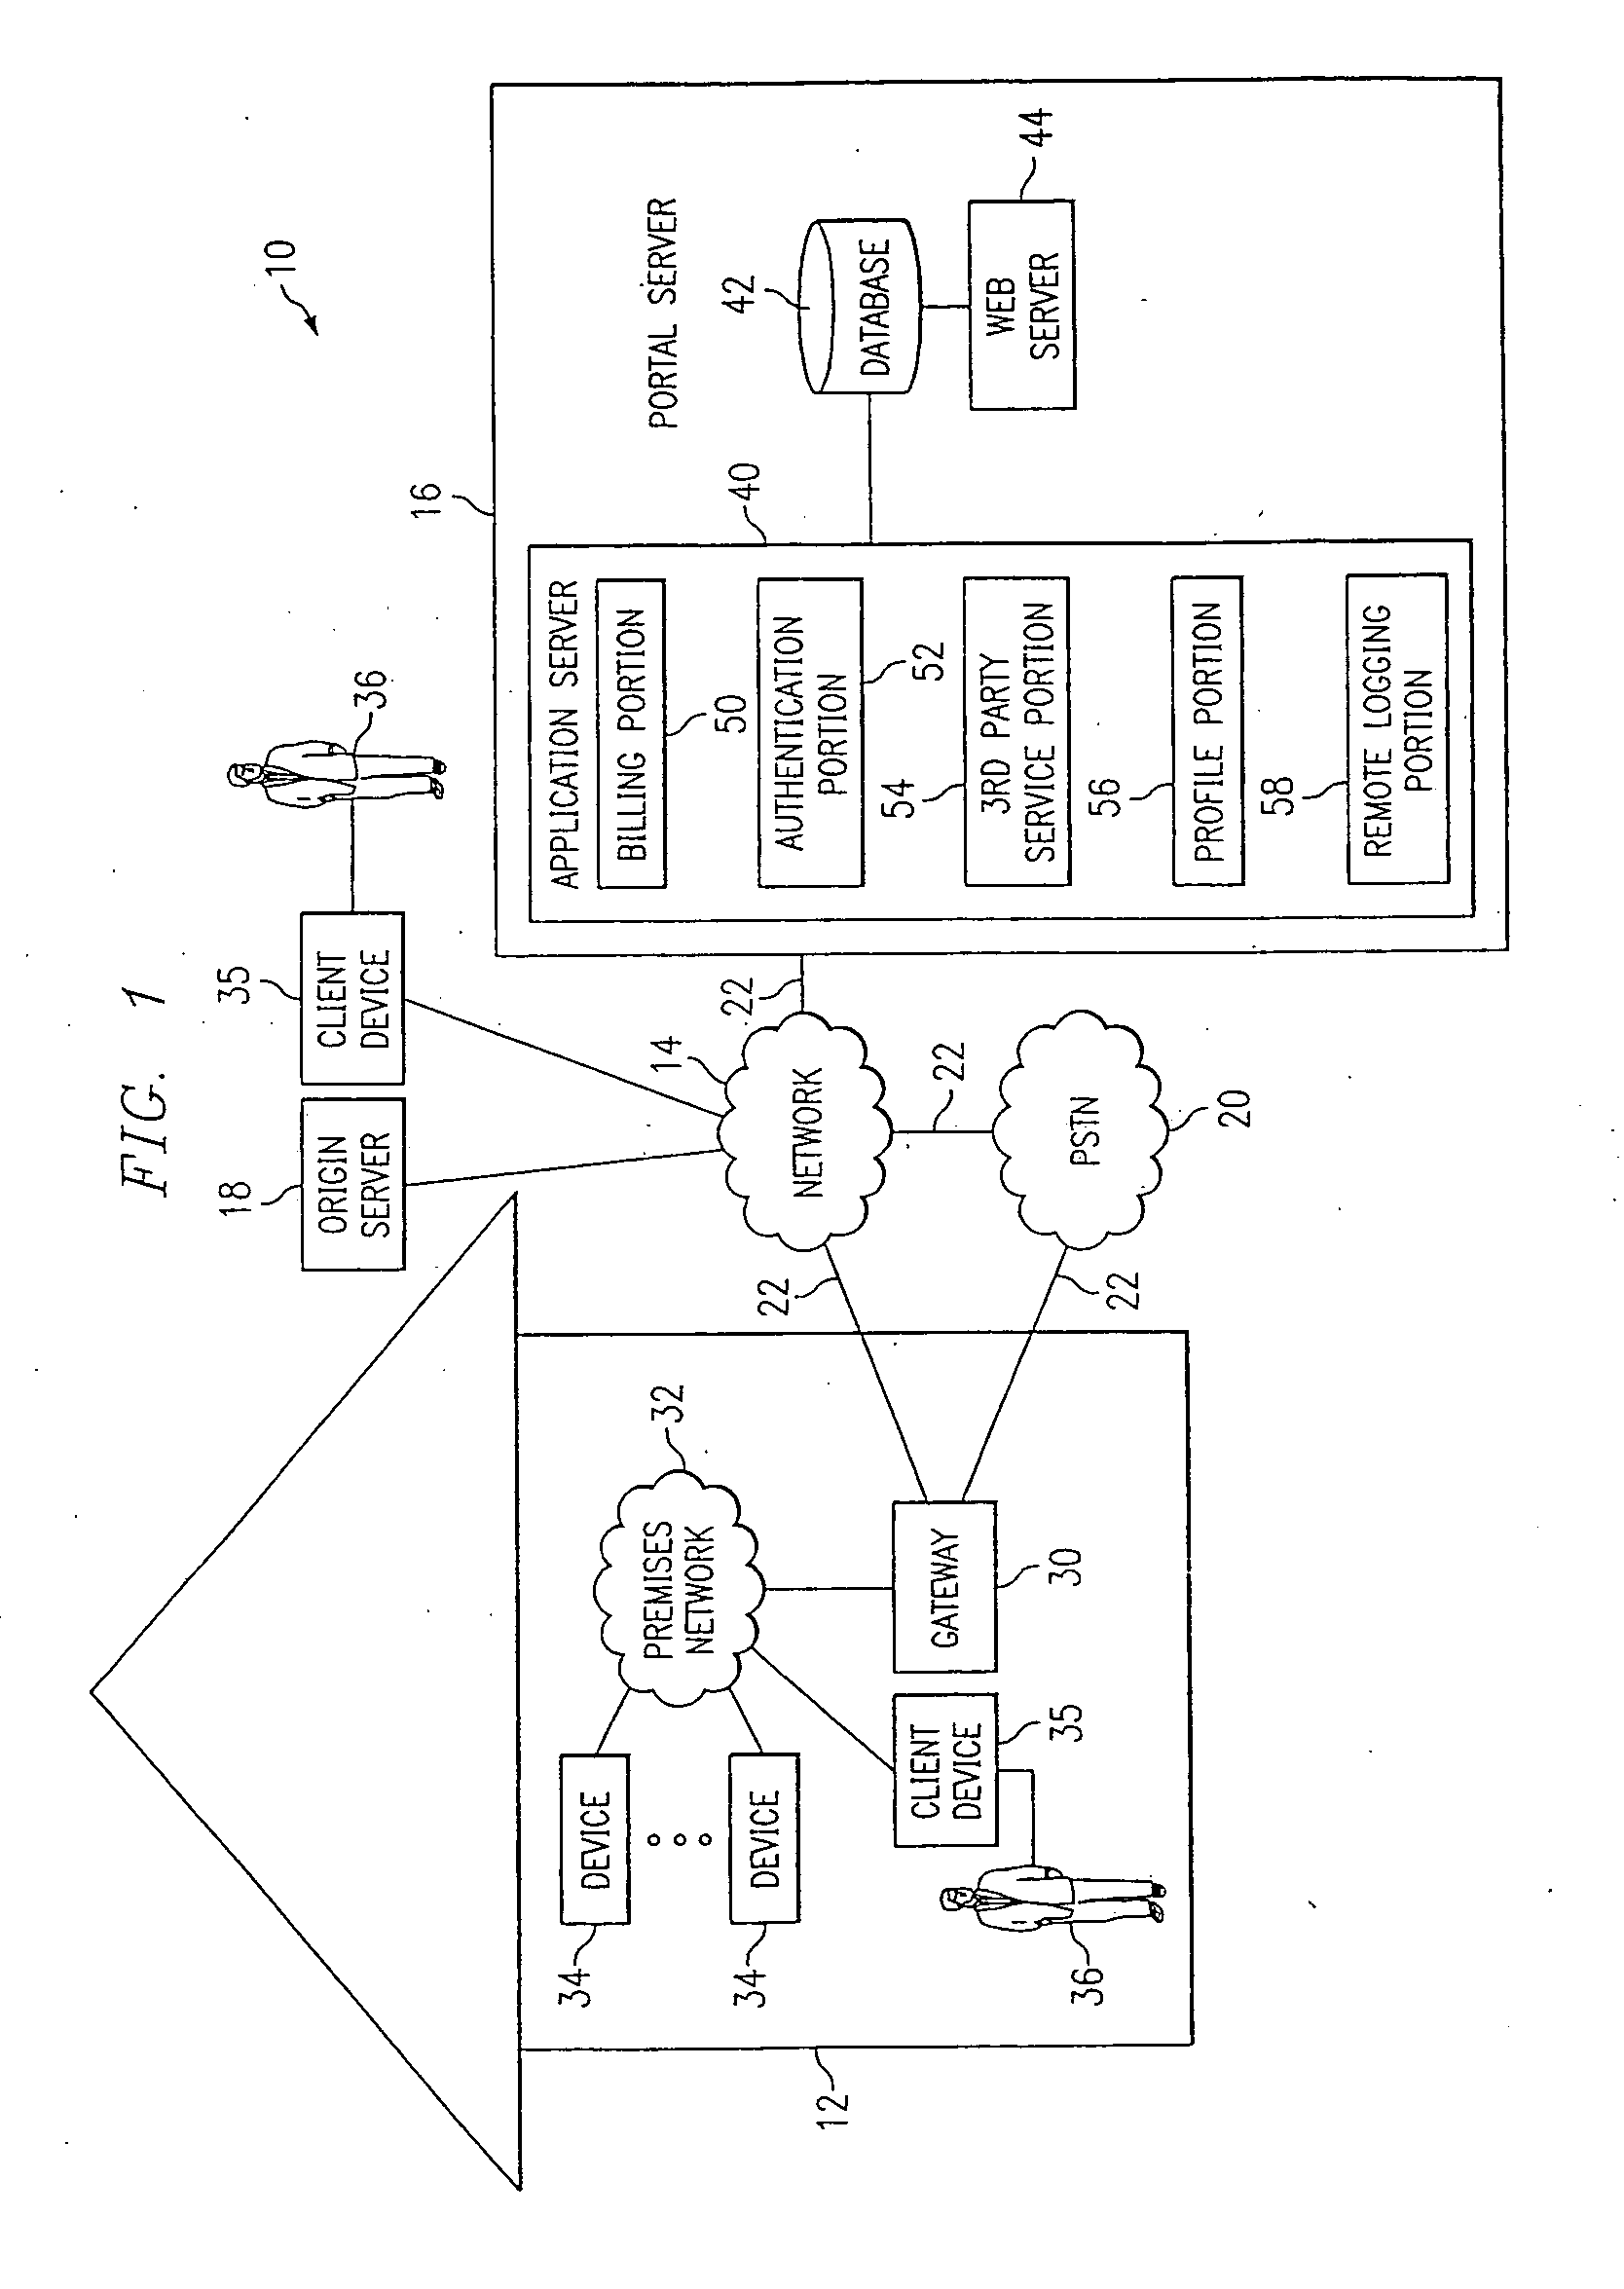 Method and system for service-enablement gateway and its service portal